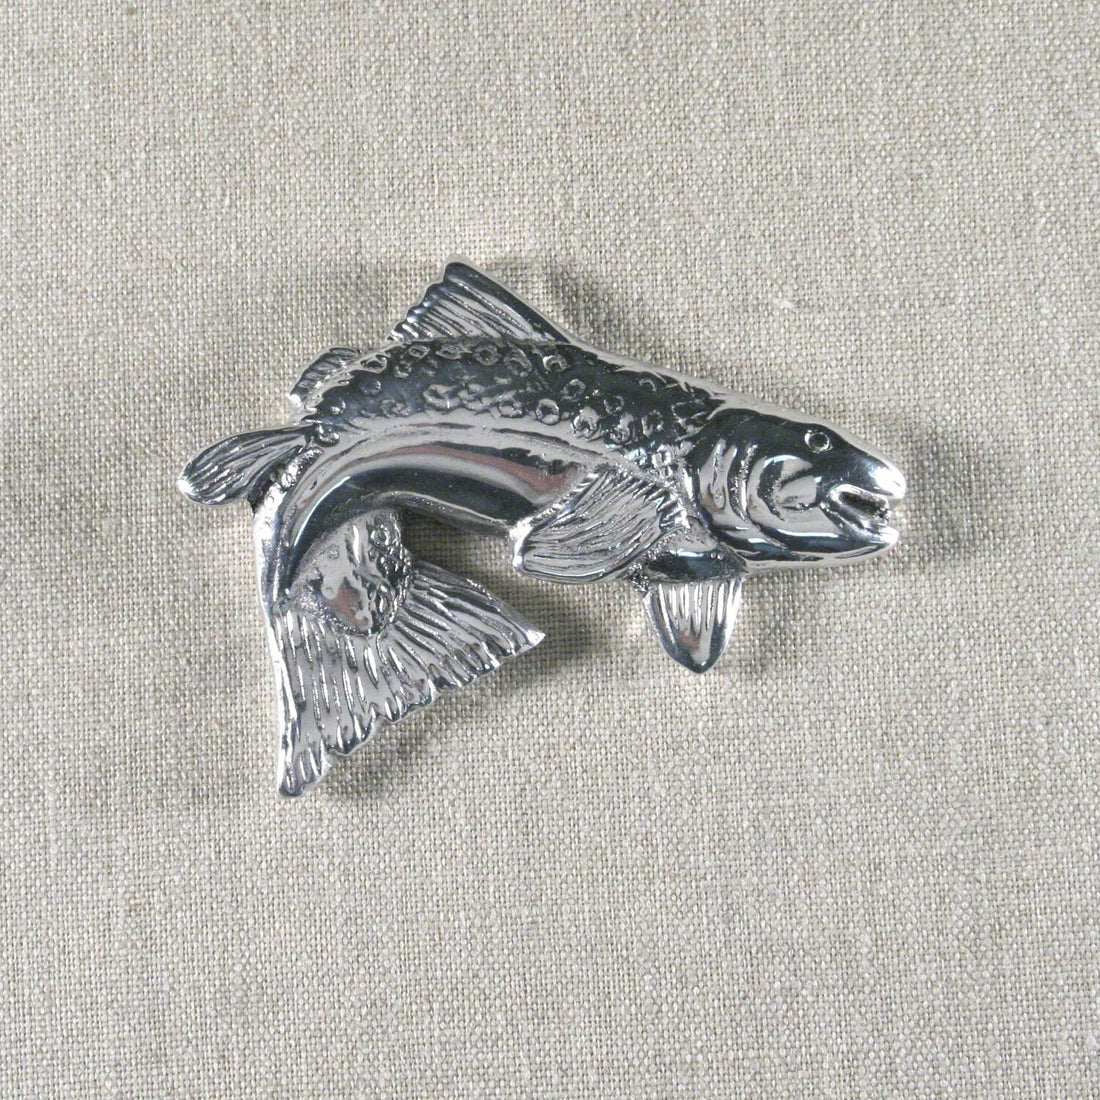 GIFTABLES Ocean Salmon Weight